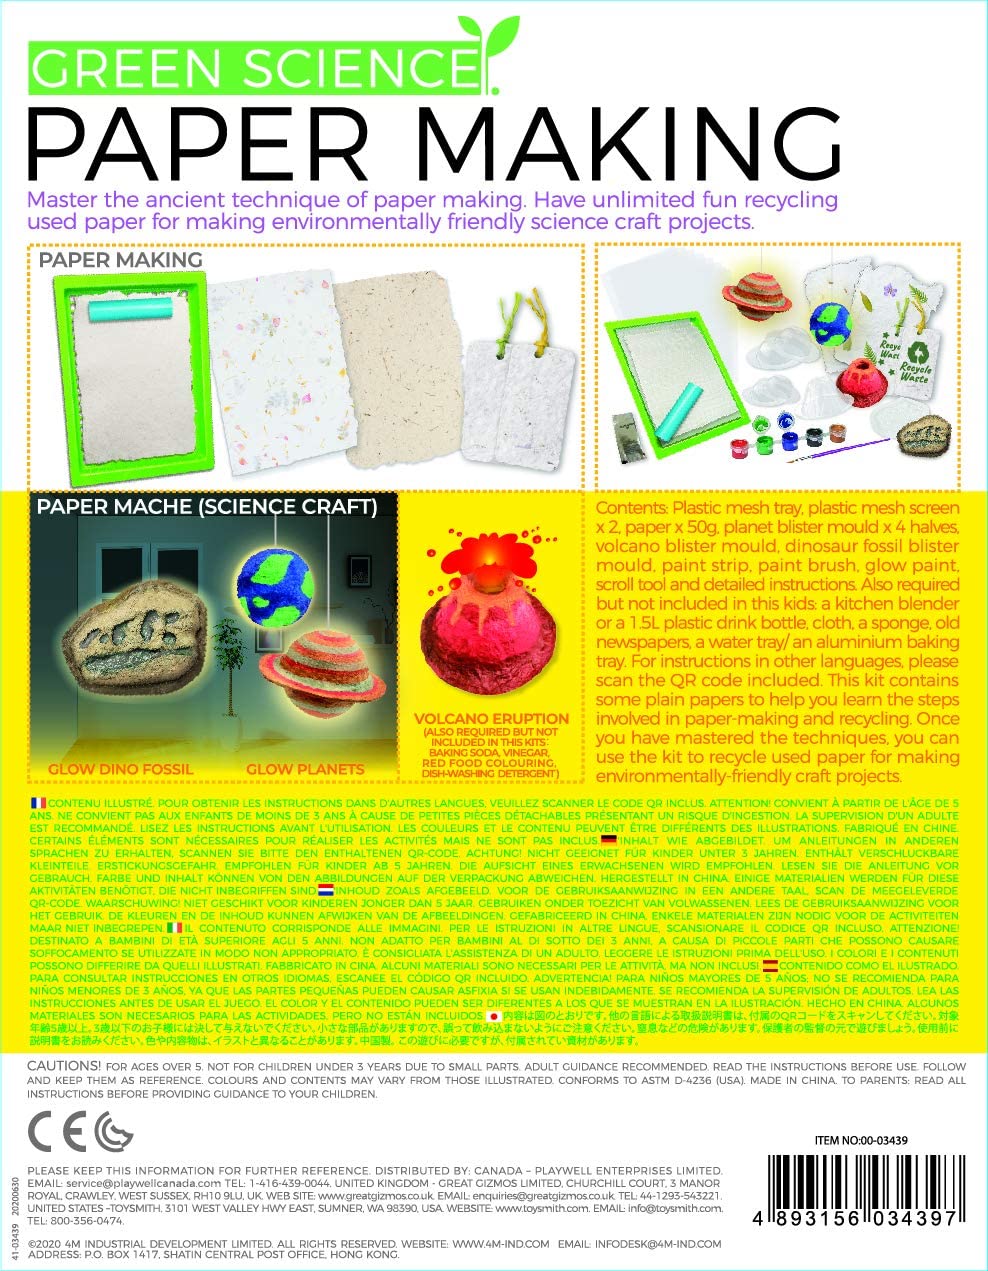 Paper Making Kit - A2Z Science & Learning Toy Store